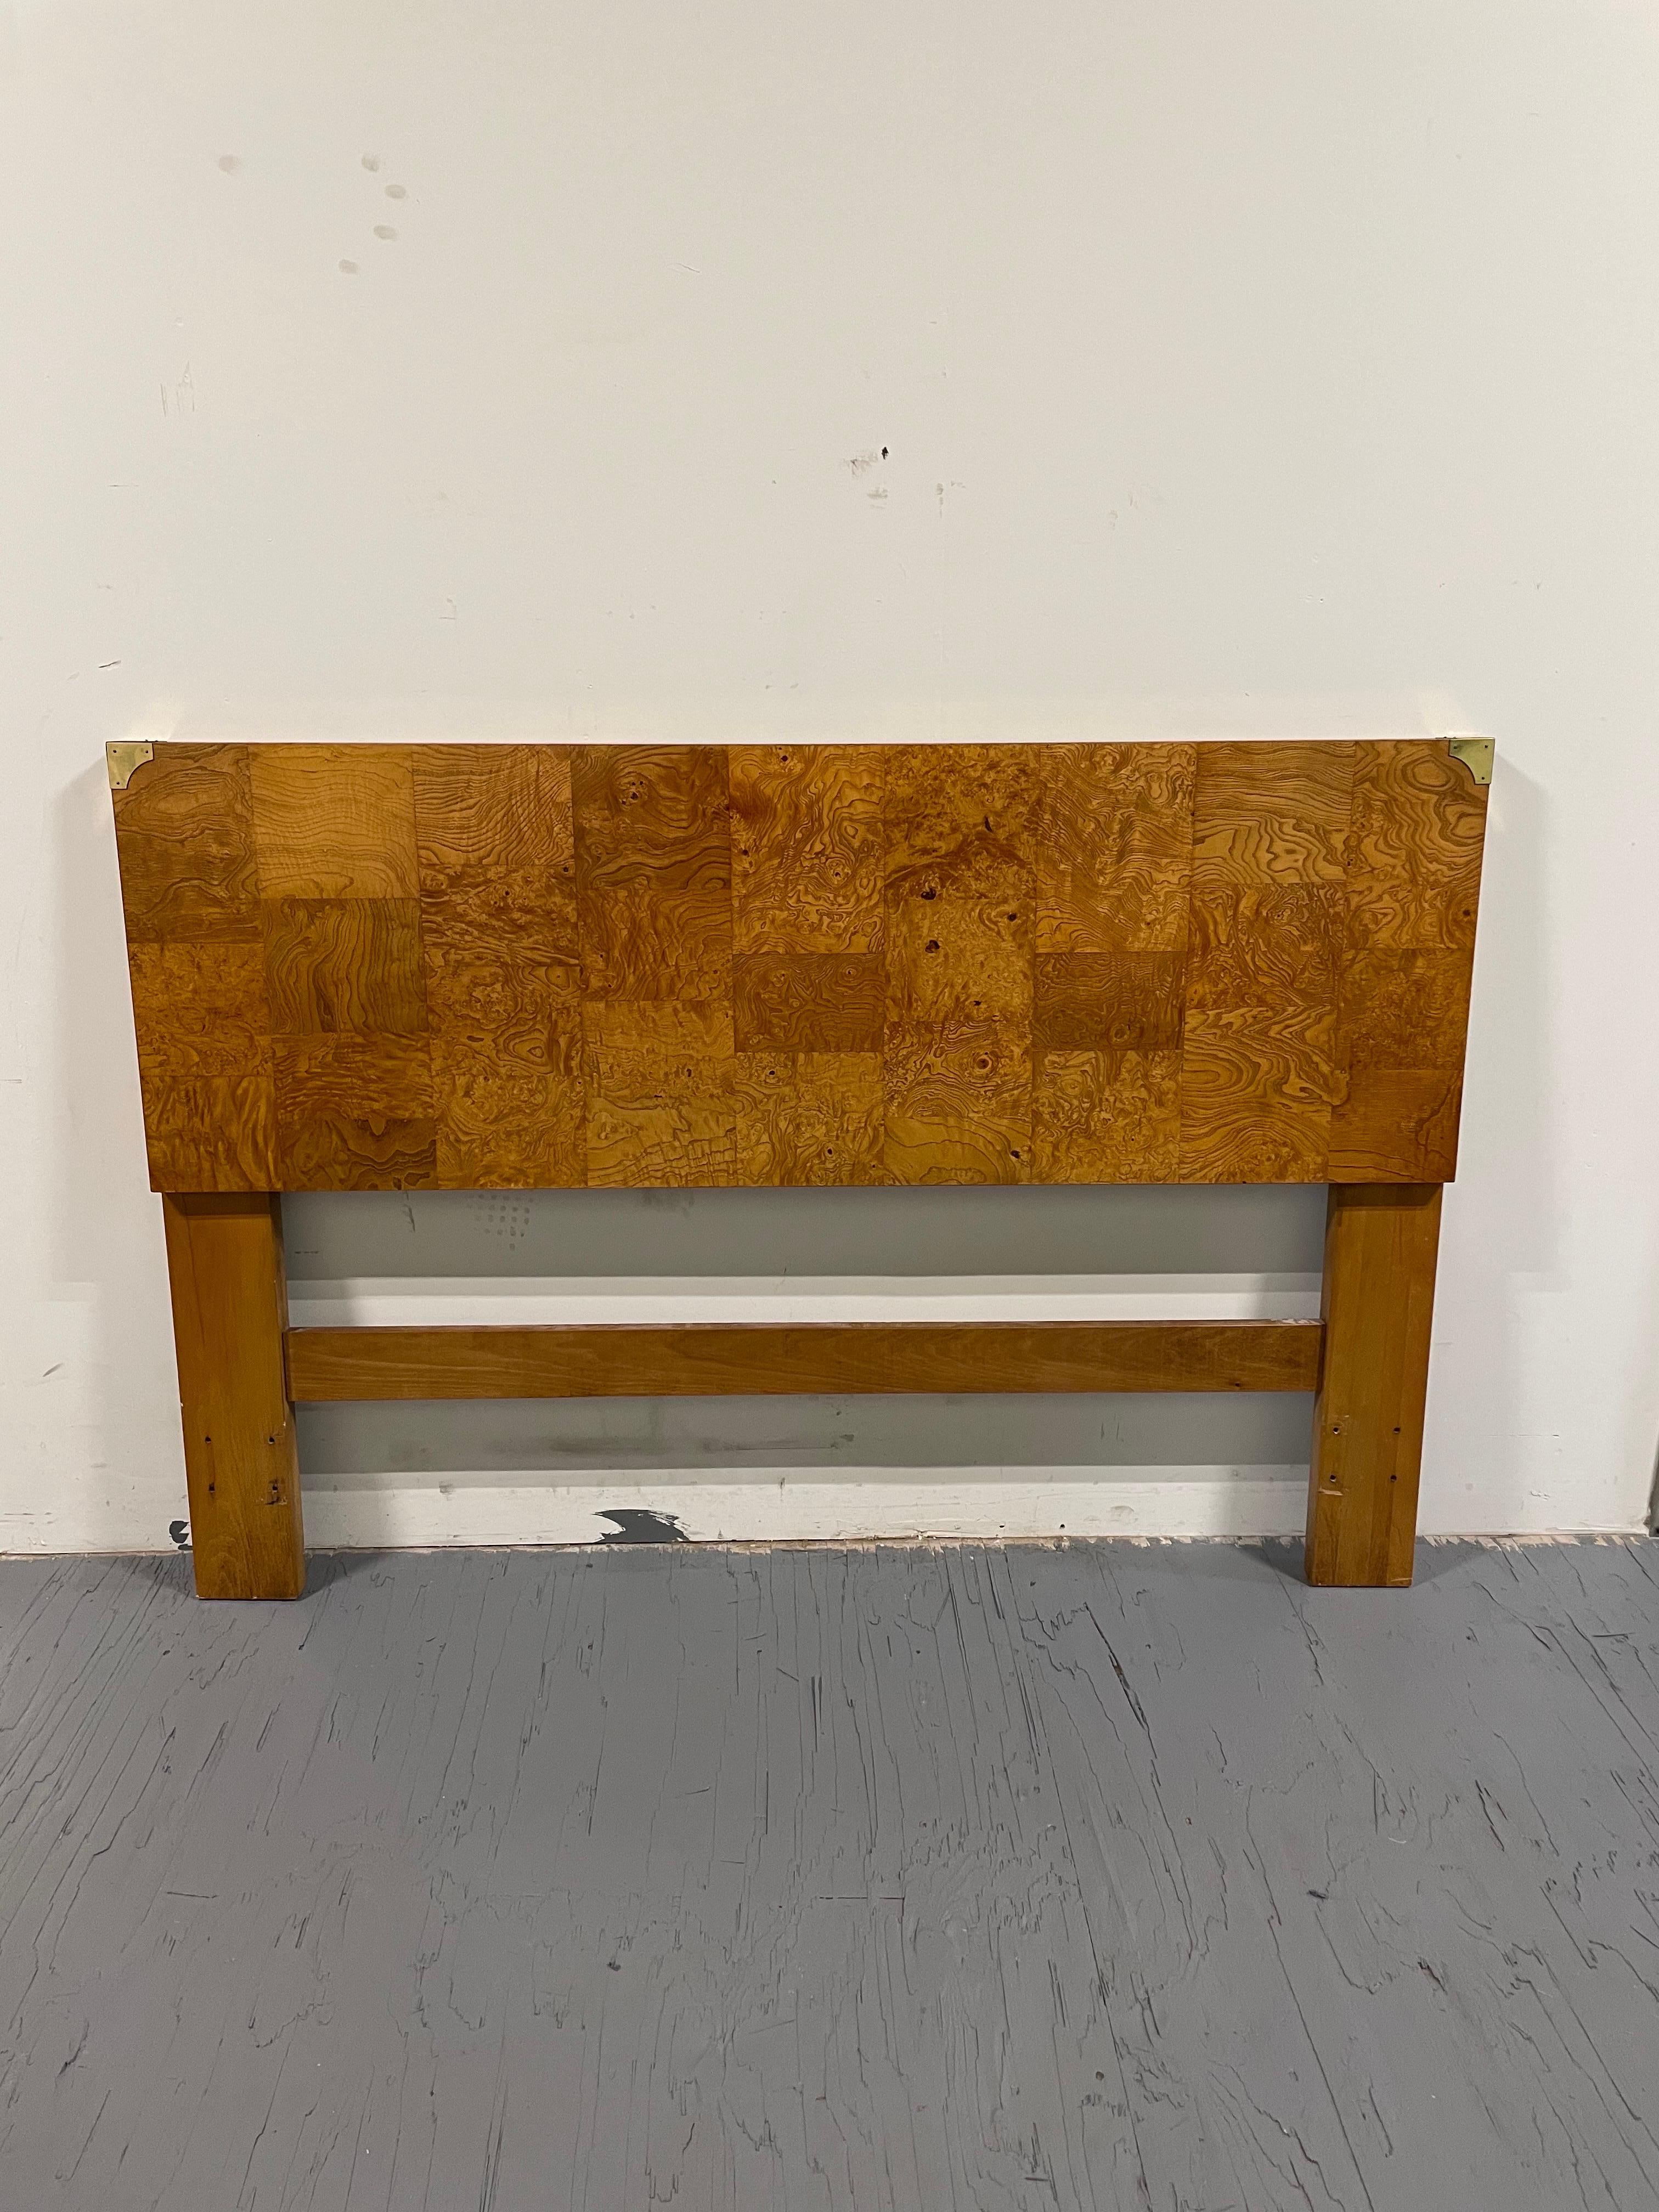 Mid-Century Modern Hollywood Regency Campaign style full or queen size headboard by Bernhardt. Milo Baughman patchwork patterned Olive Wood with Brass corner caps.

USA, Circa 1970s.